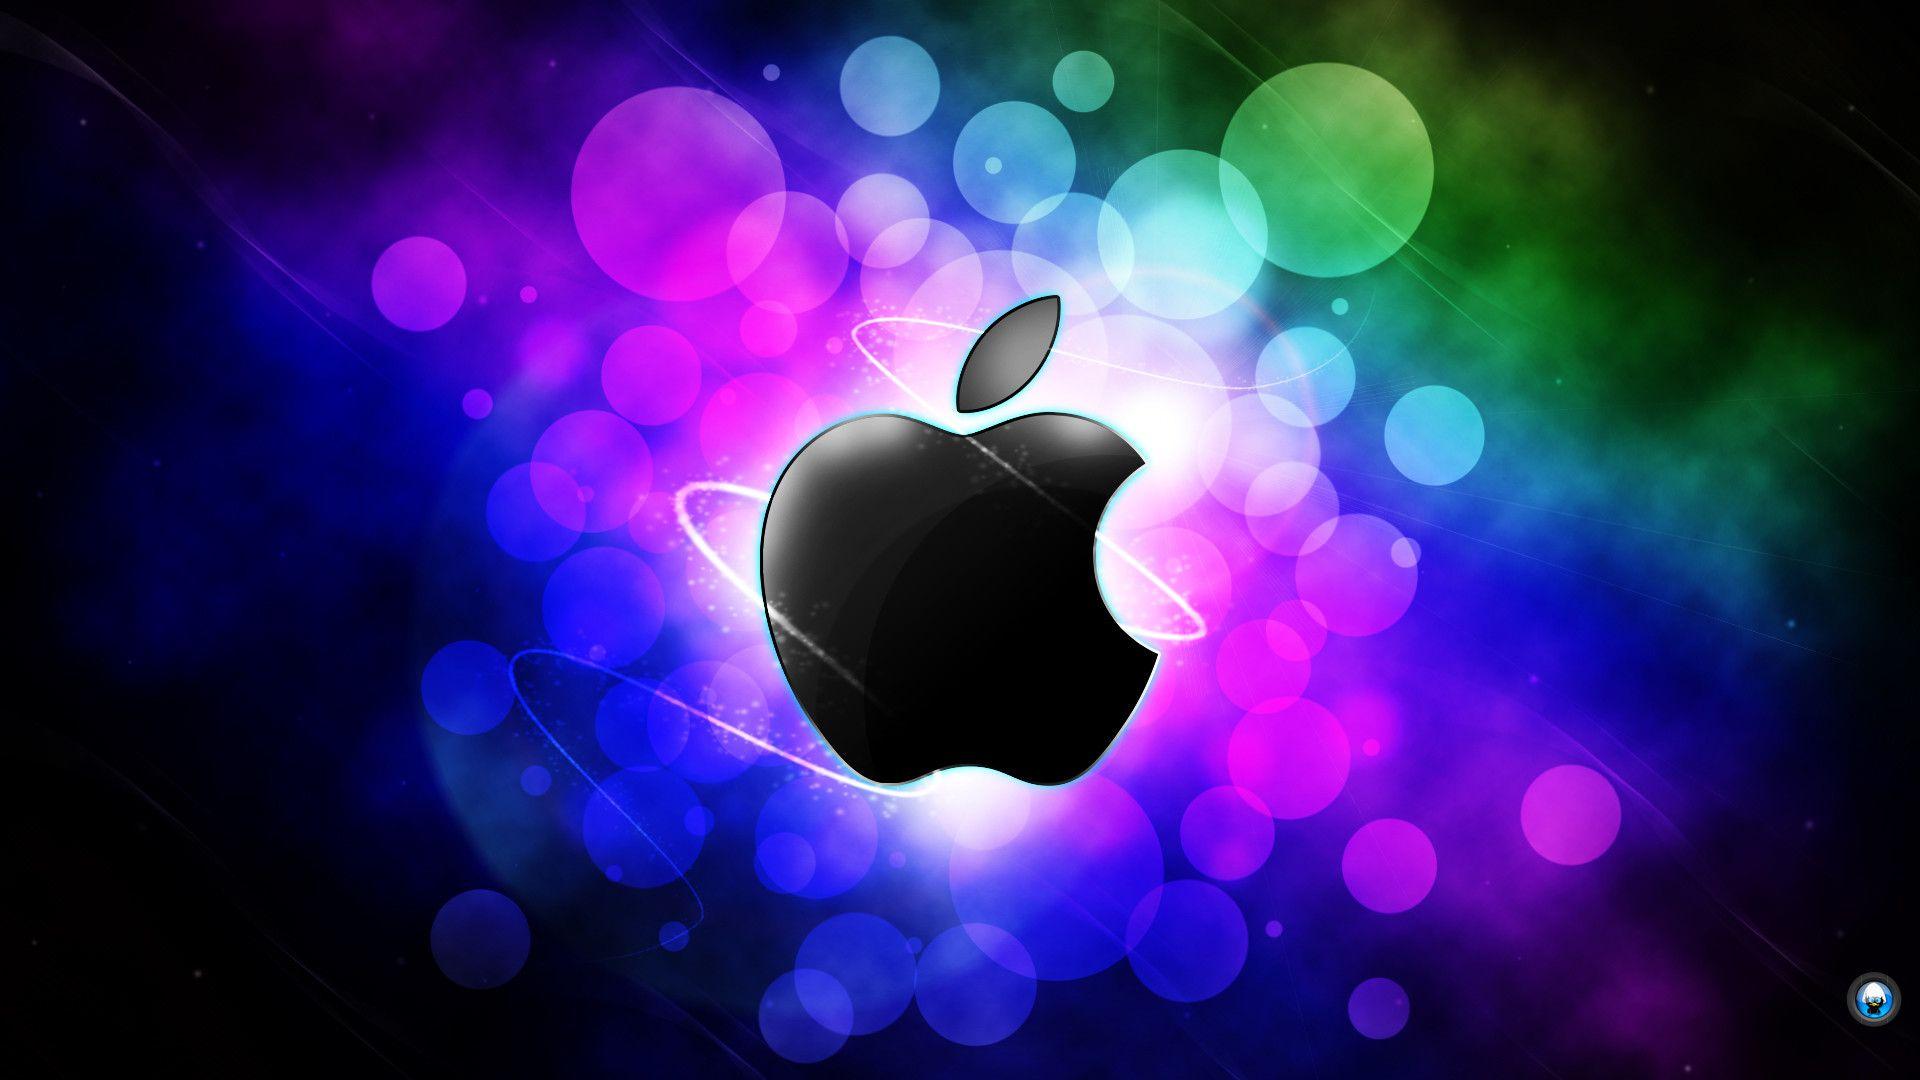 Cool Apple Logo Wallpapers - Top Free Cool Apple Logo Backgrounds ...